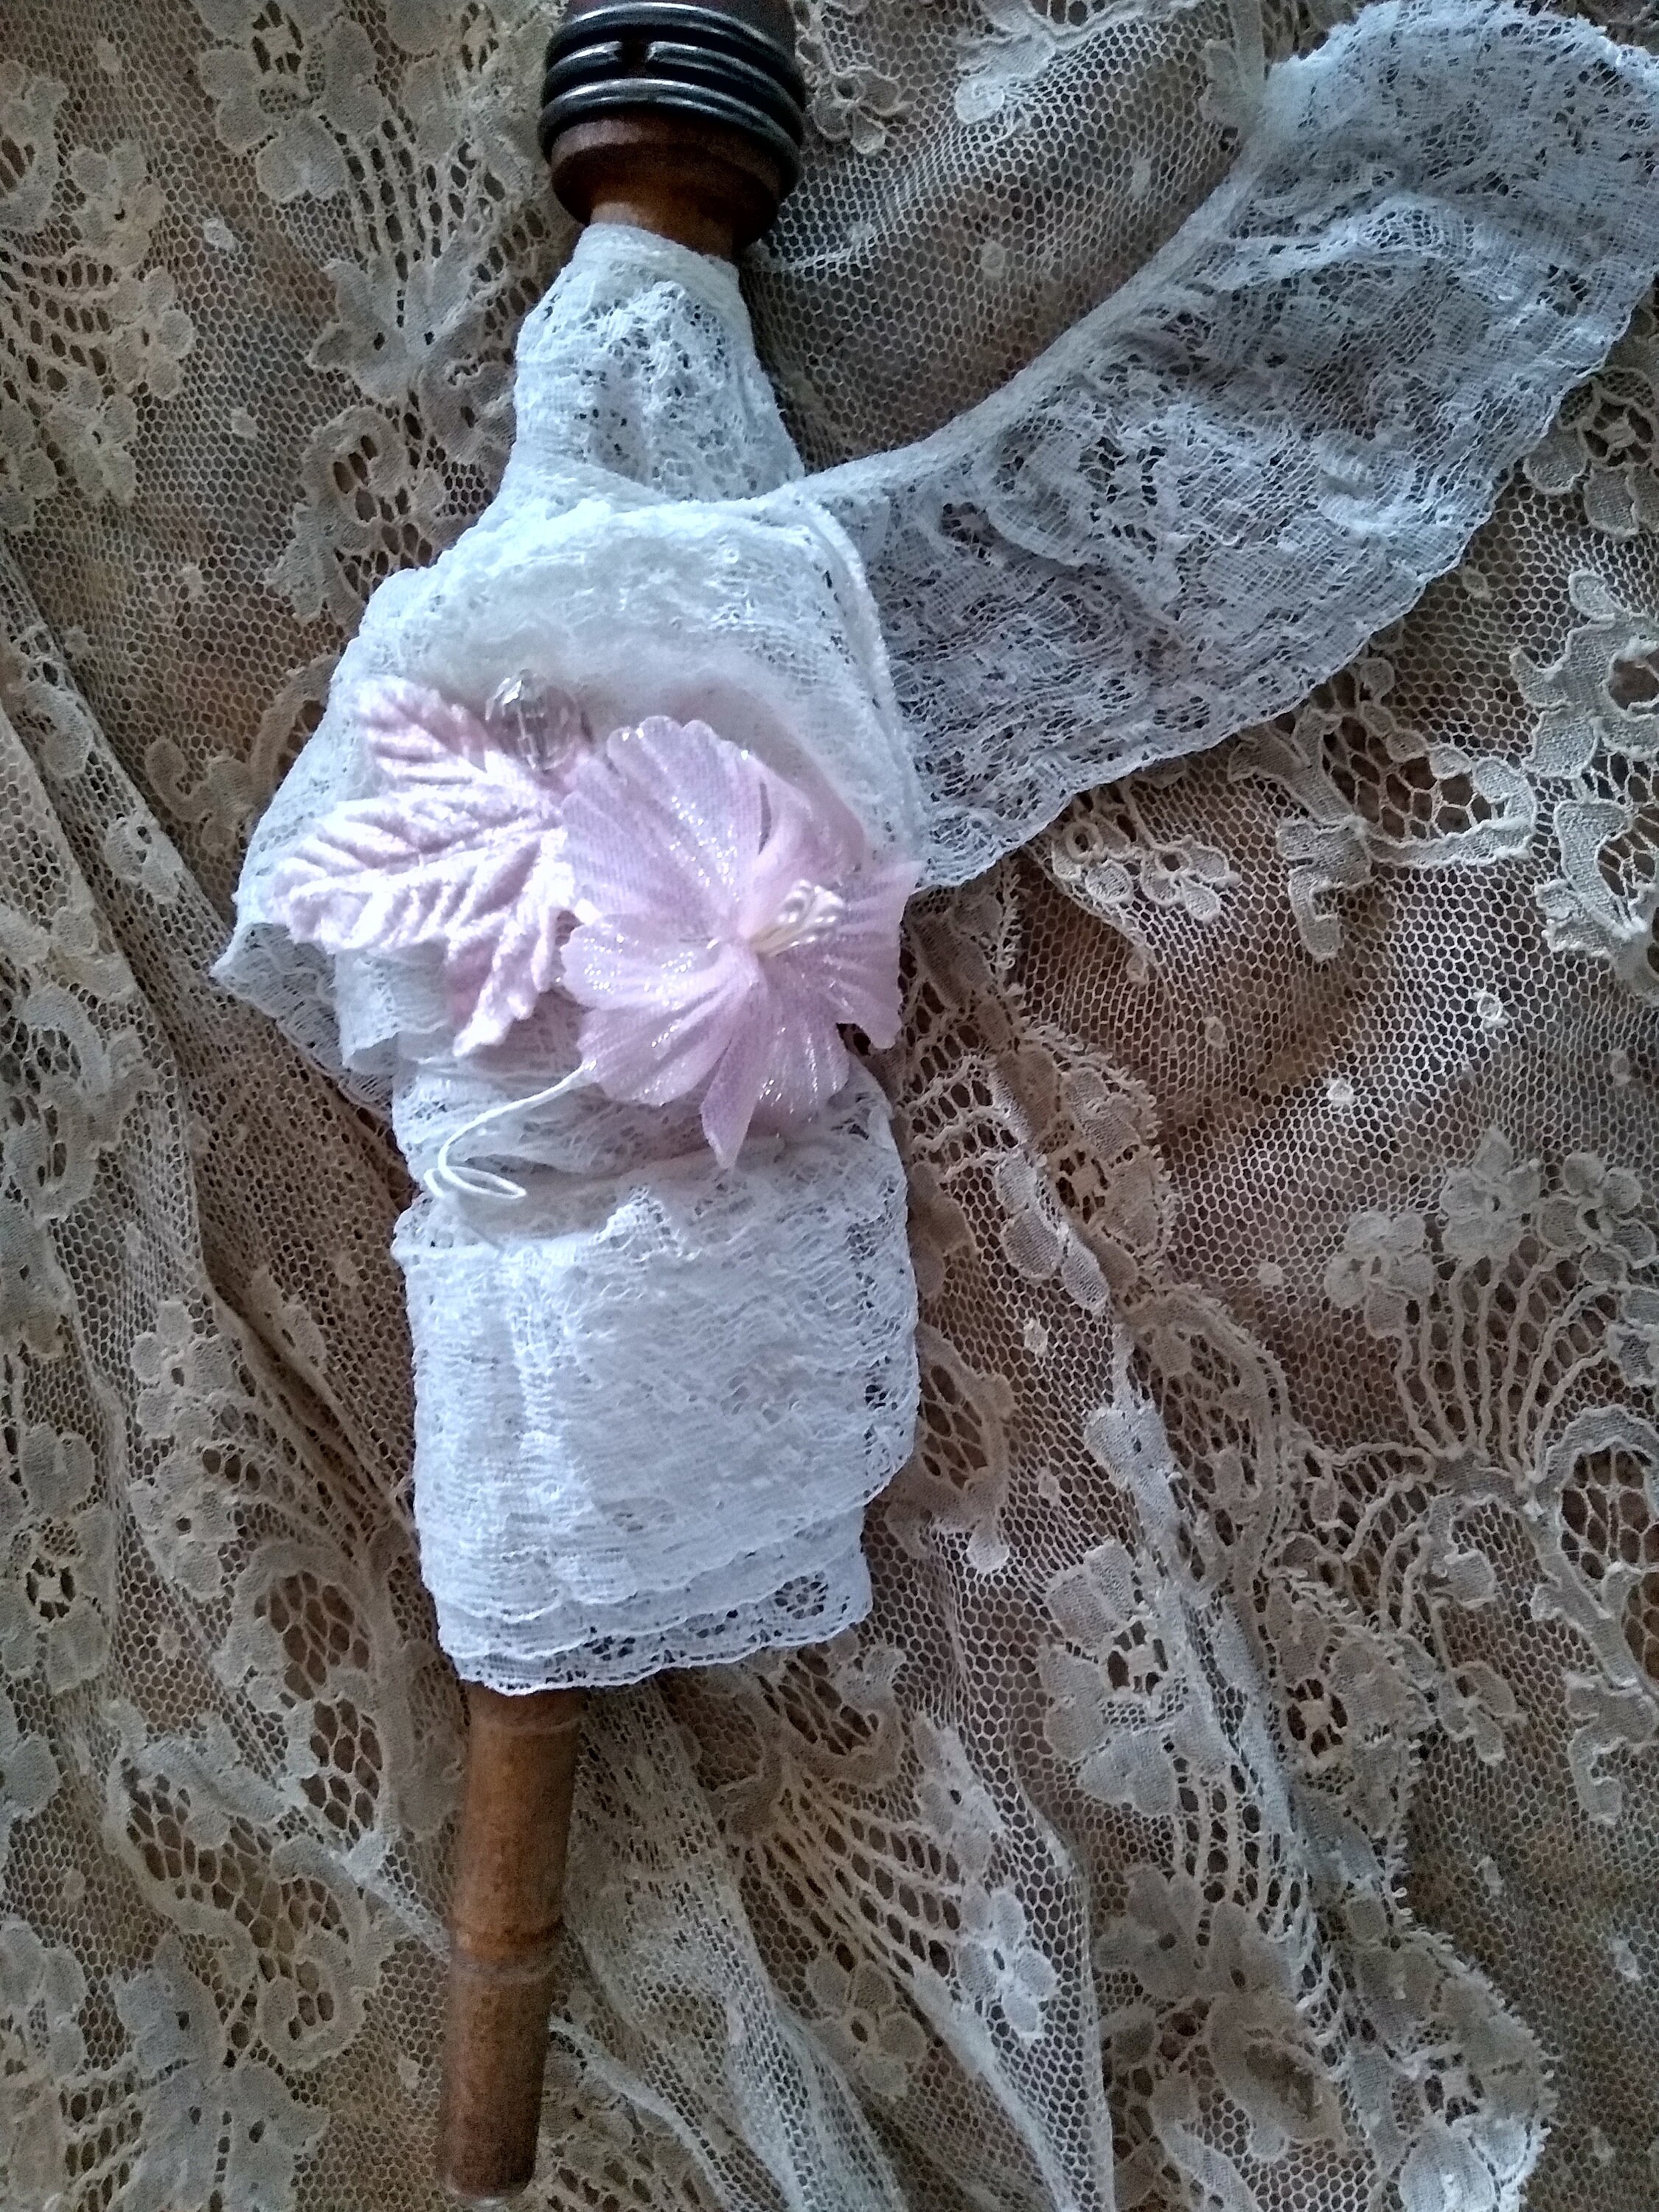 Vintage white lace wrapped around a vintage spool with millinery flowers